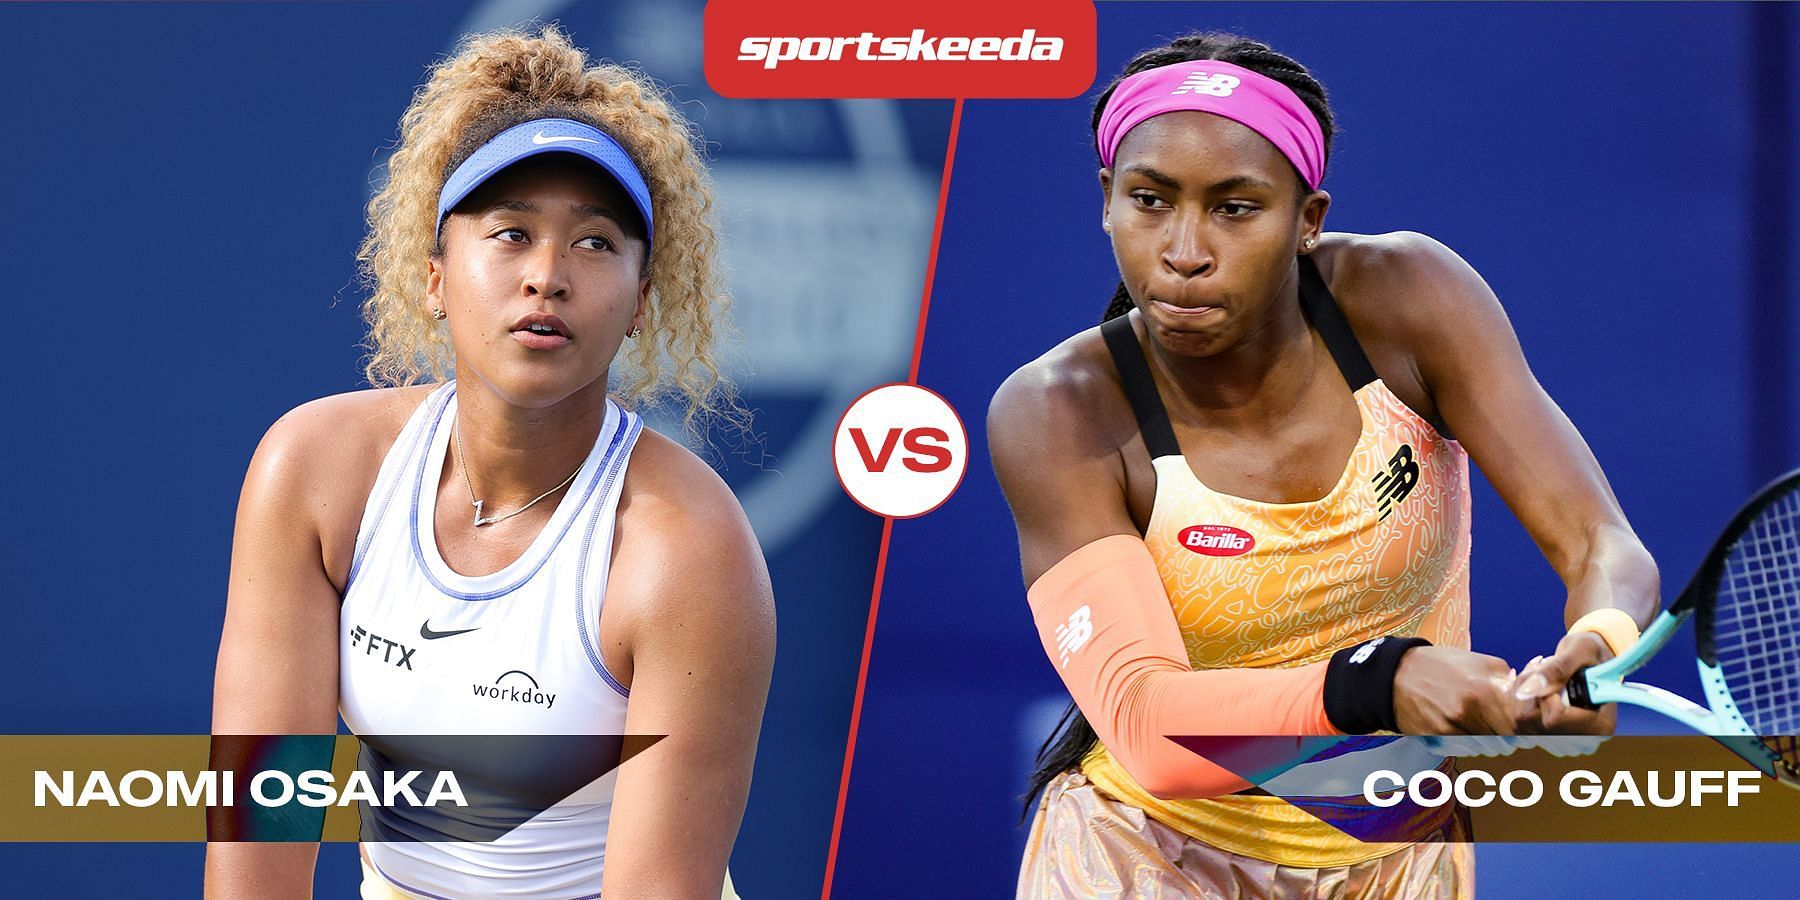 Naomi Osaka will square off against Coco Gauff in the second round of the Silicon Valley Classic